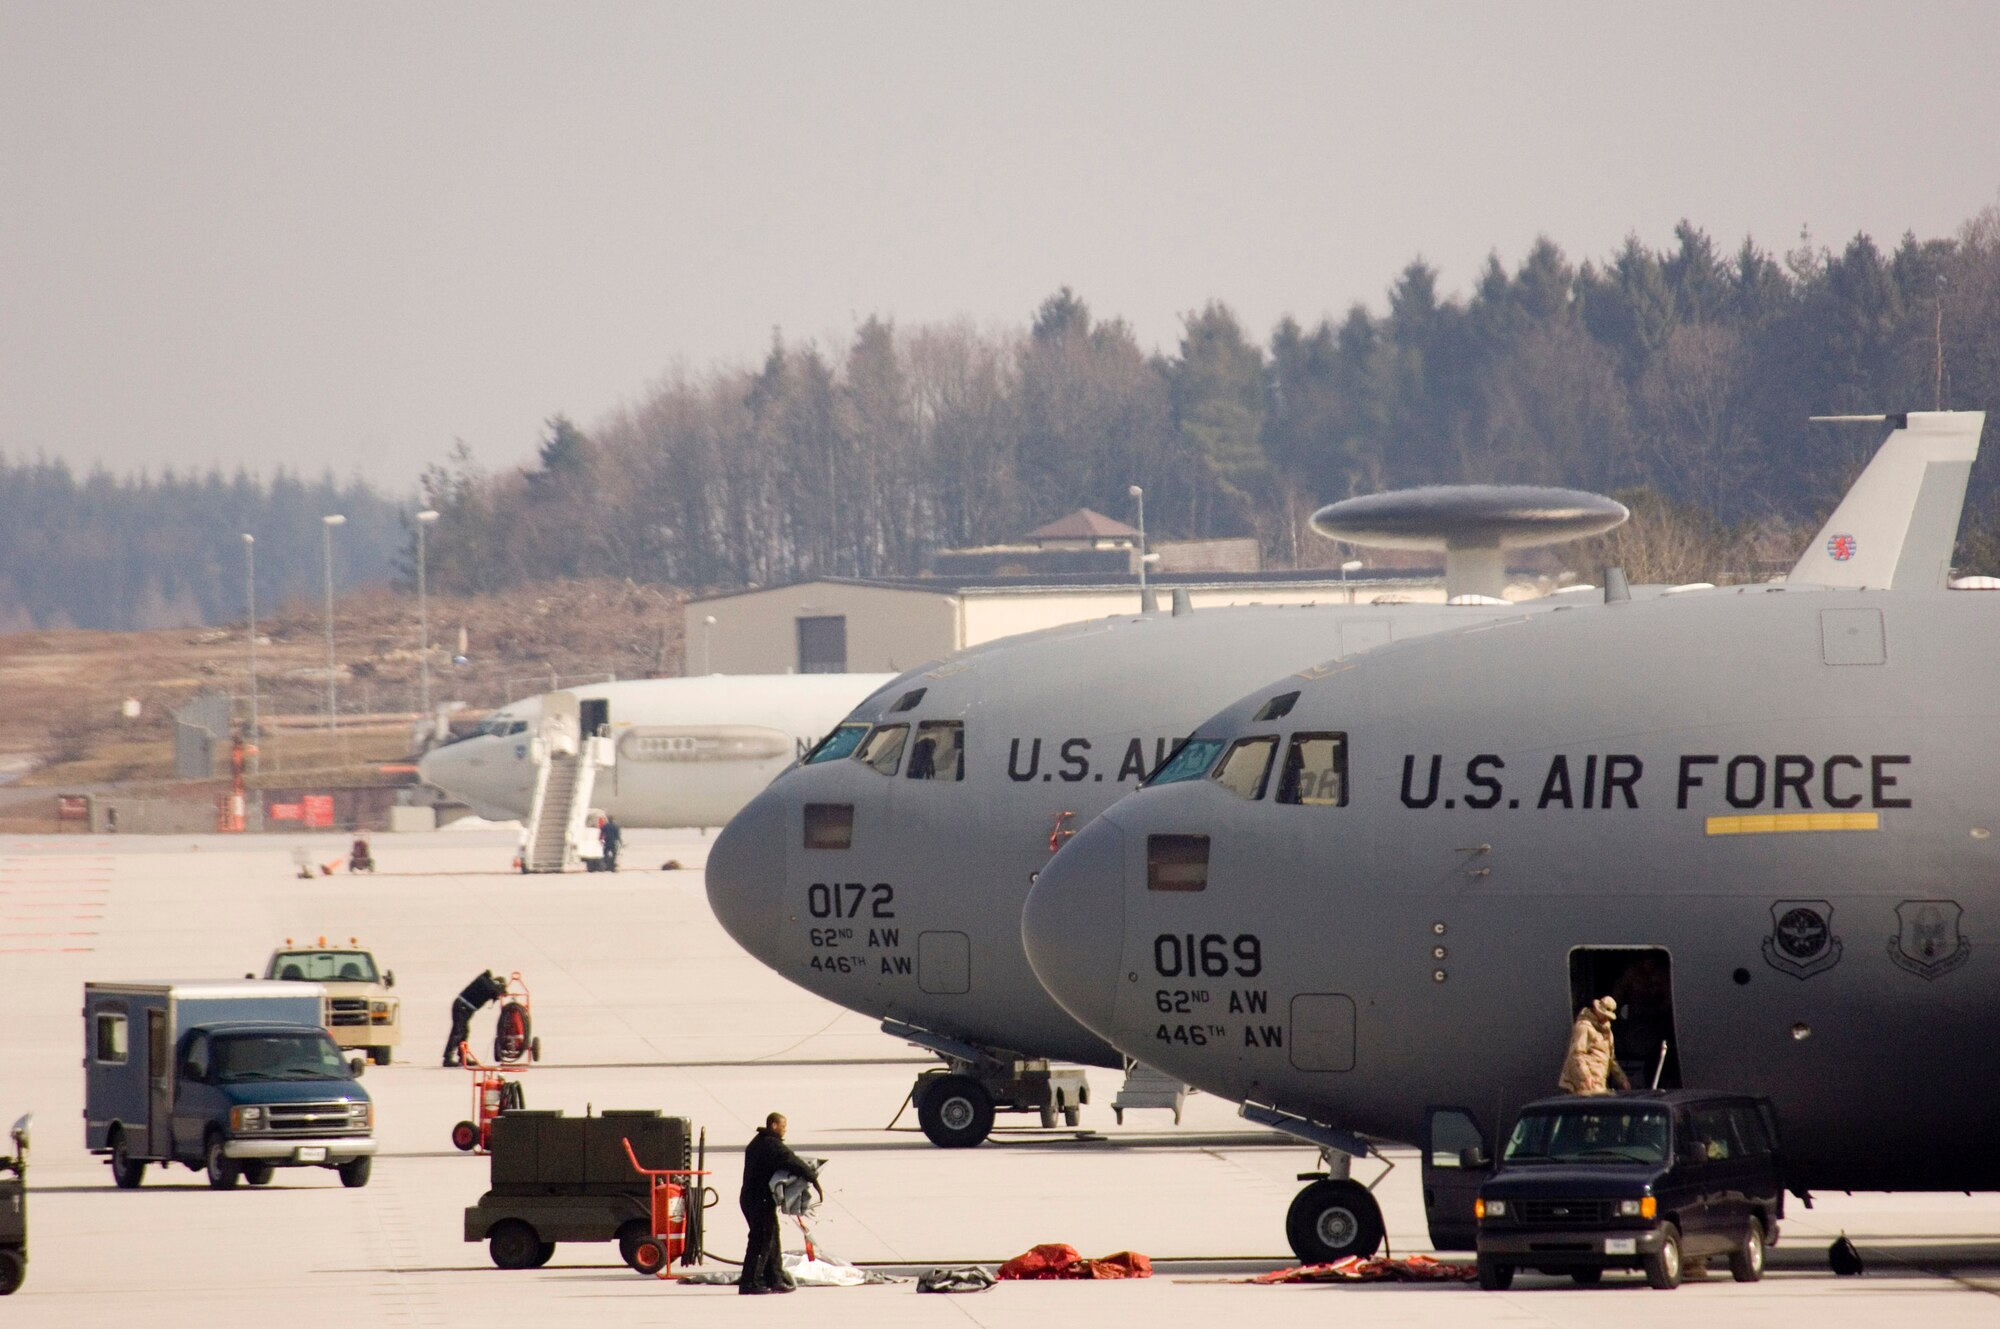 A pair of C-17 Globemaster IIIs and an E-3 Sentry (AWACS) sit on the tarmac at Spangdahlem Air Base, Germany, Wednesday, March 22, 2006. The transports, from McChord Air Force Base, Wash., and the NATO airborne warning and control system will receive services from Spangdahlem's 726th Air Mobility Squadron. (U.S. Air Force photo/Master Sgt. John E. Lasky)
